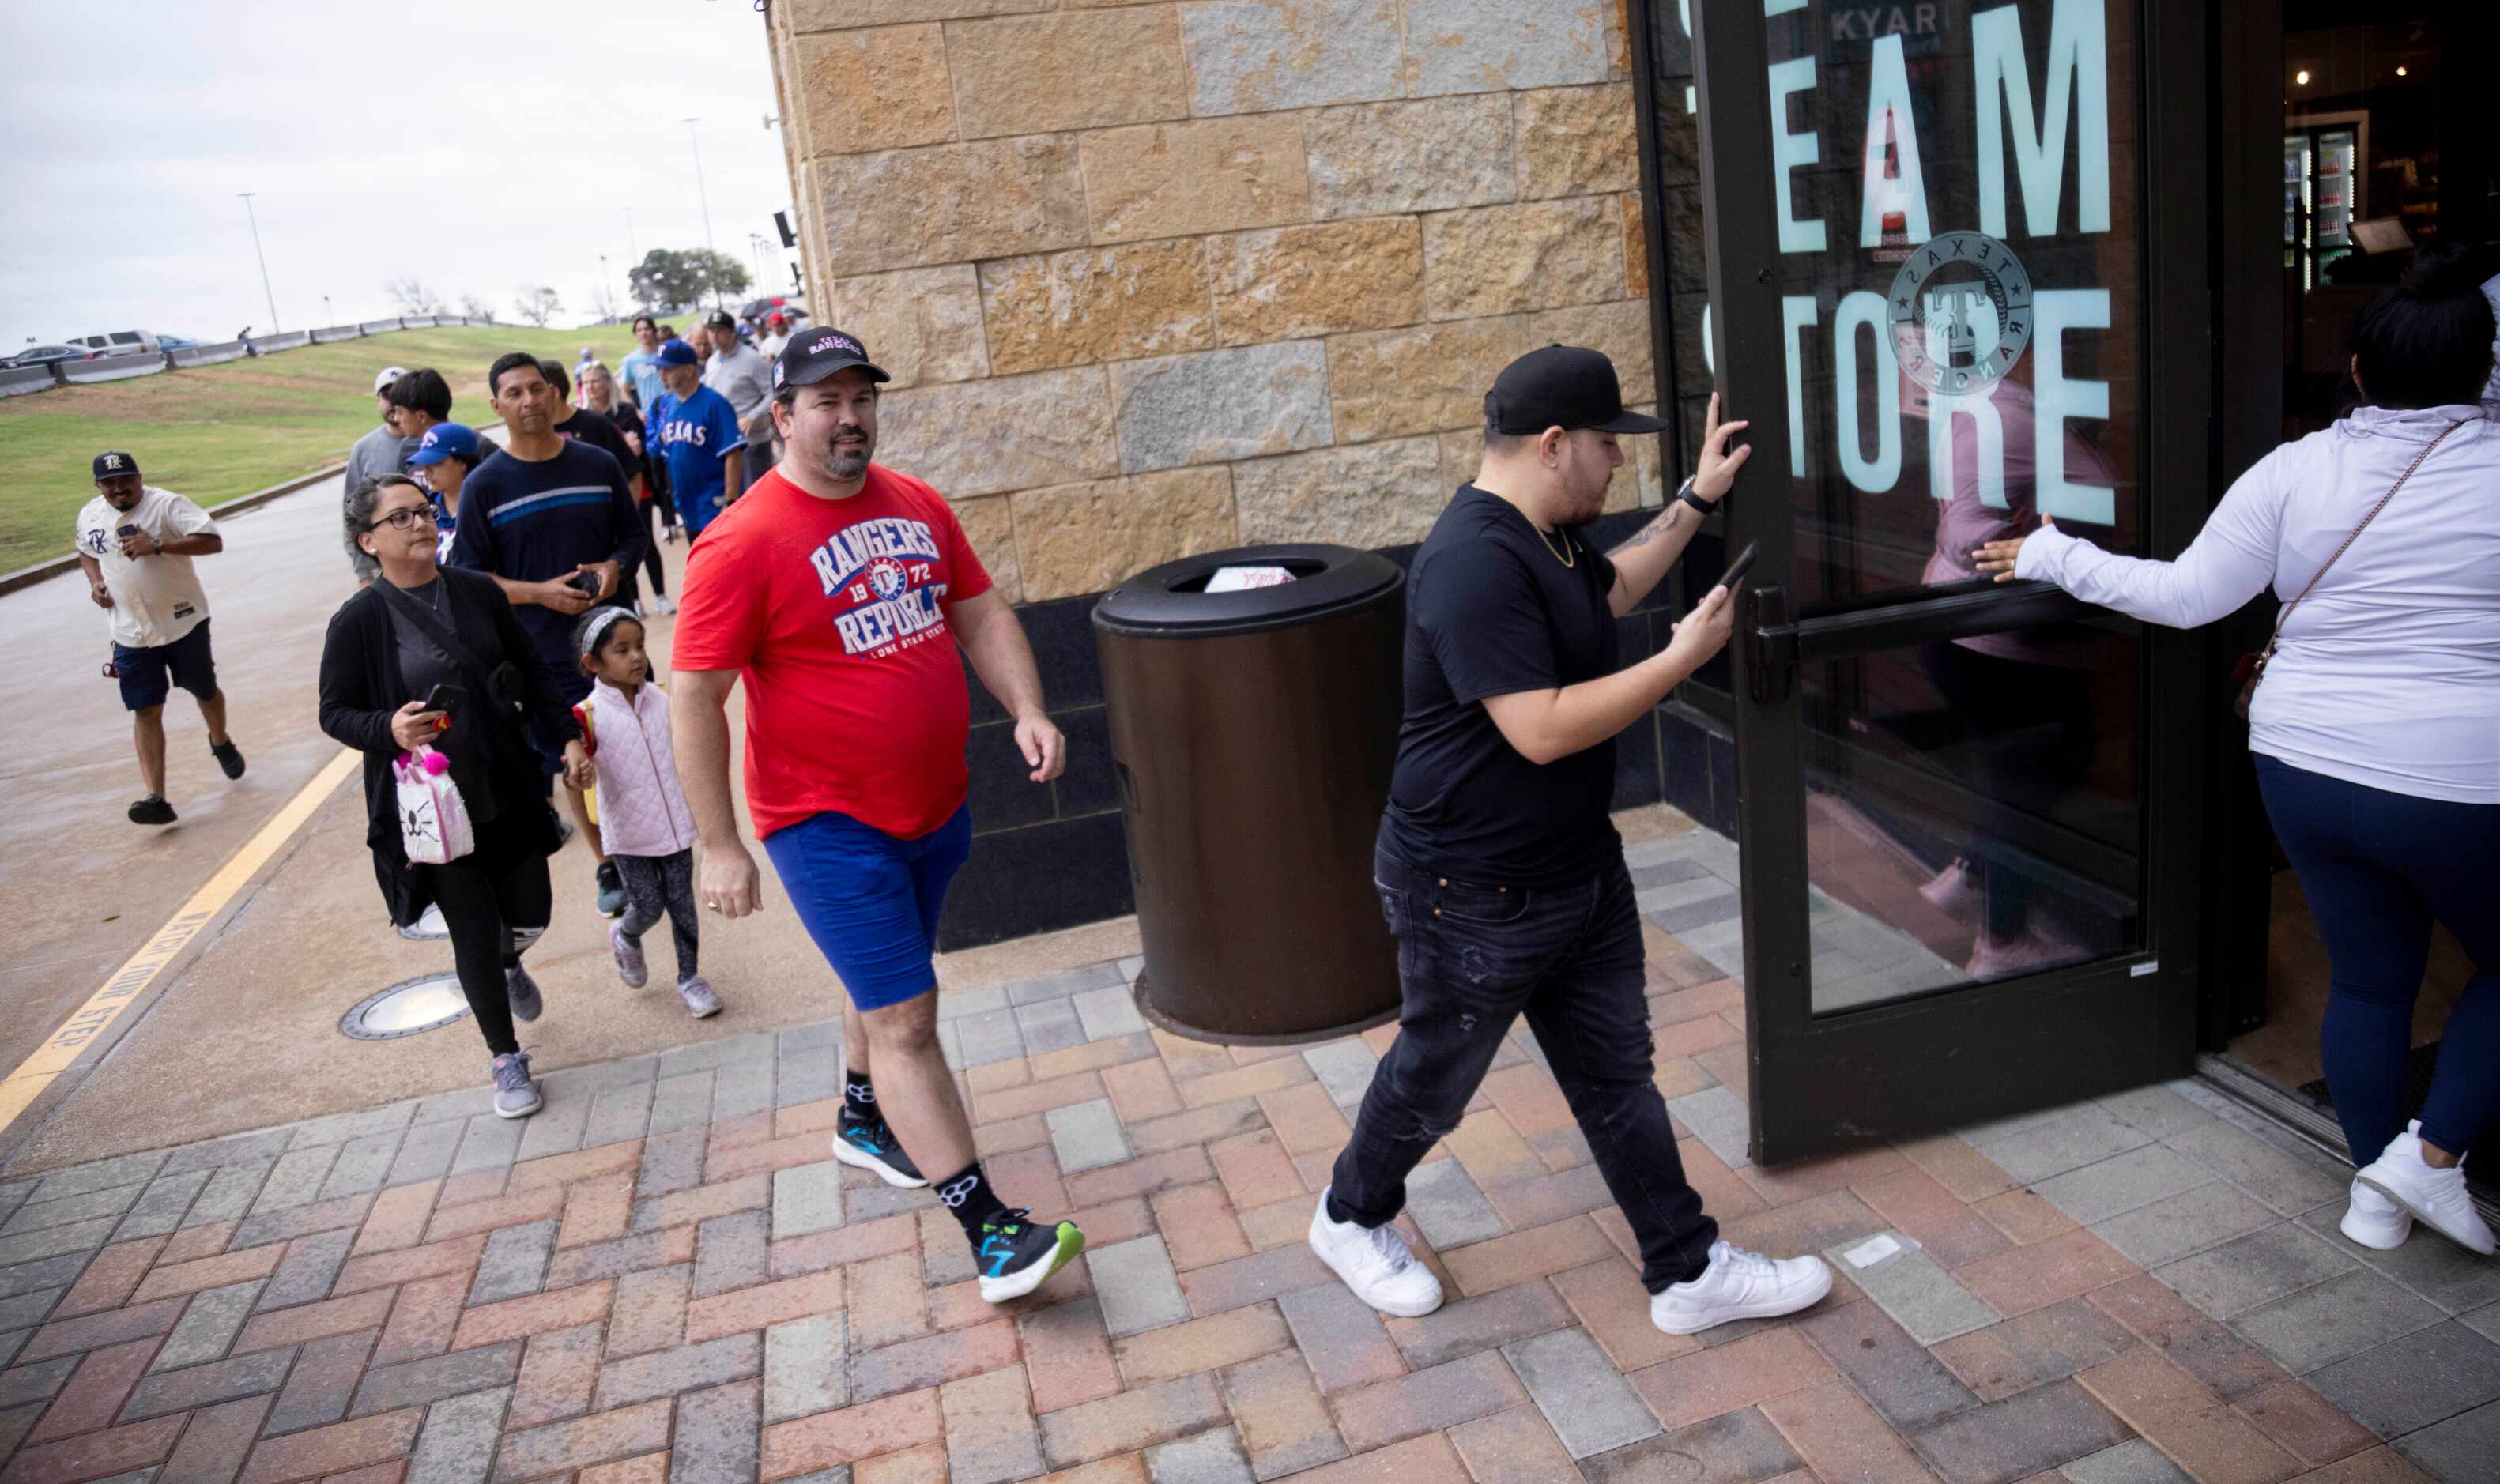 Fans enter the Grand Slam Team Store at Globe Life Field after waiting in line in Arlington...